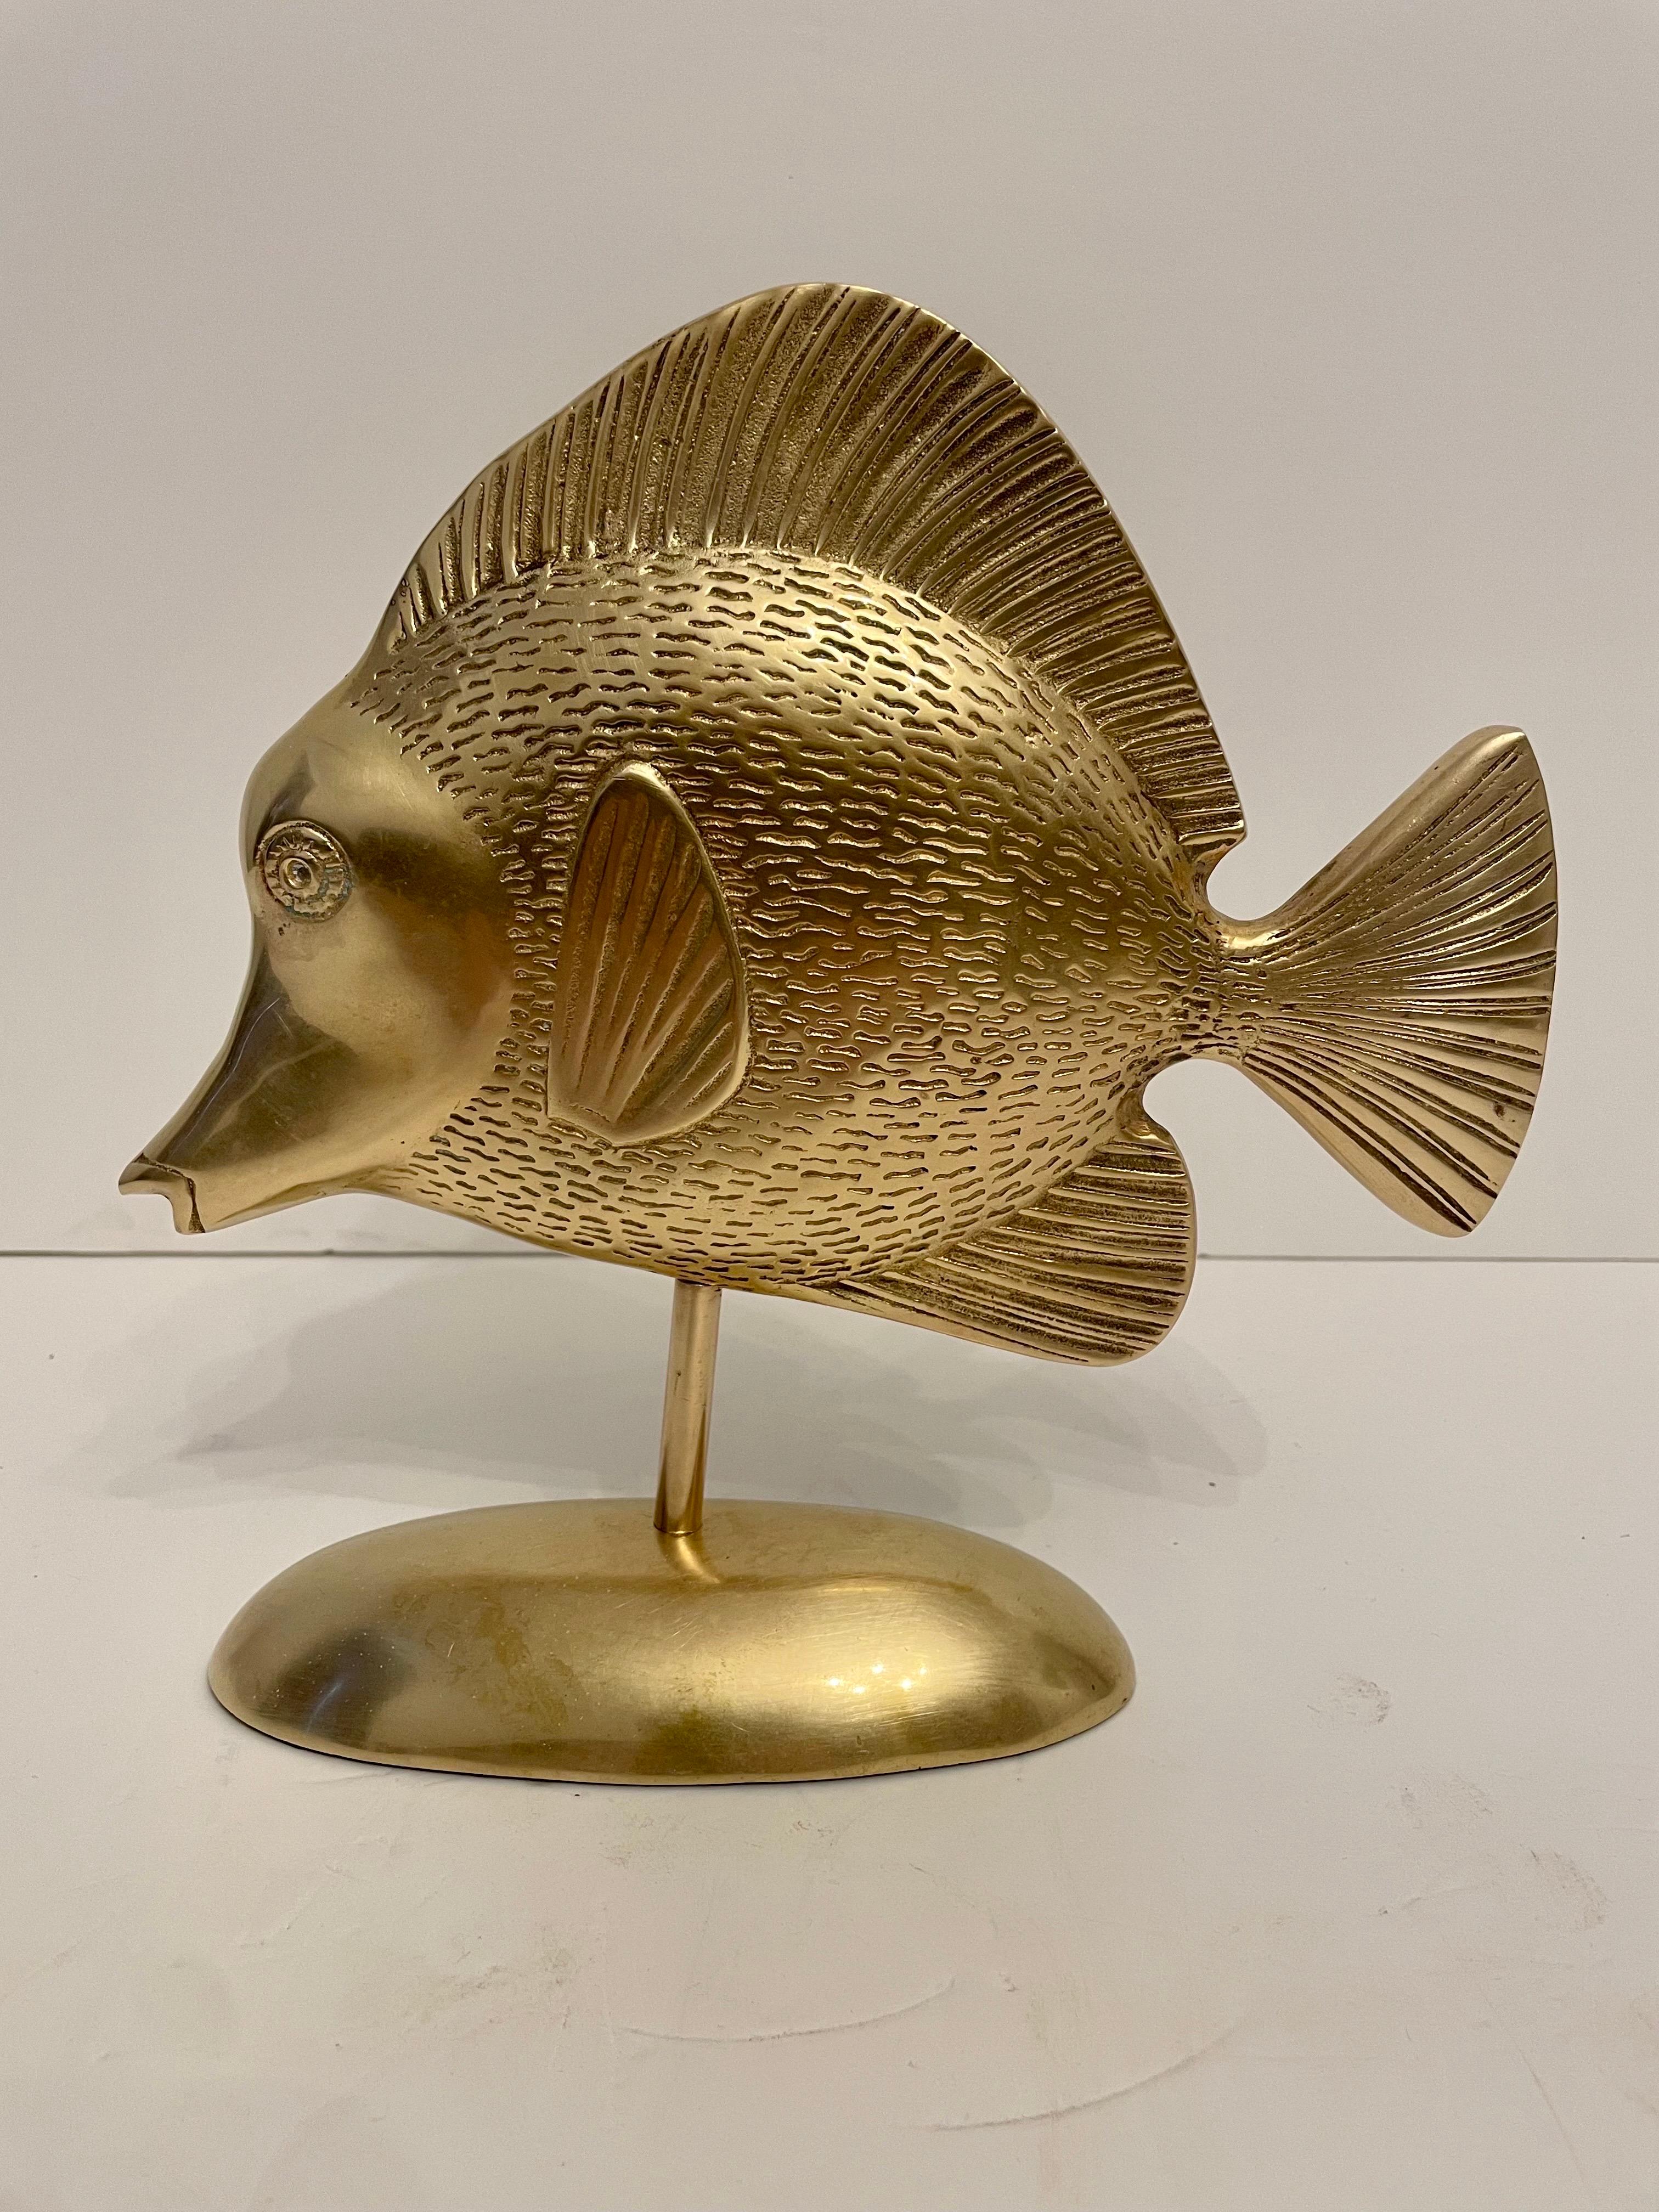 Brass Tropical tang fish sculpture on stand. Rubbery felt on bottom of base with Made In Korea sticker. Overall good condition. Dark and light spots in photos is reflection. Will look great on desk or bookcase.